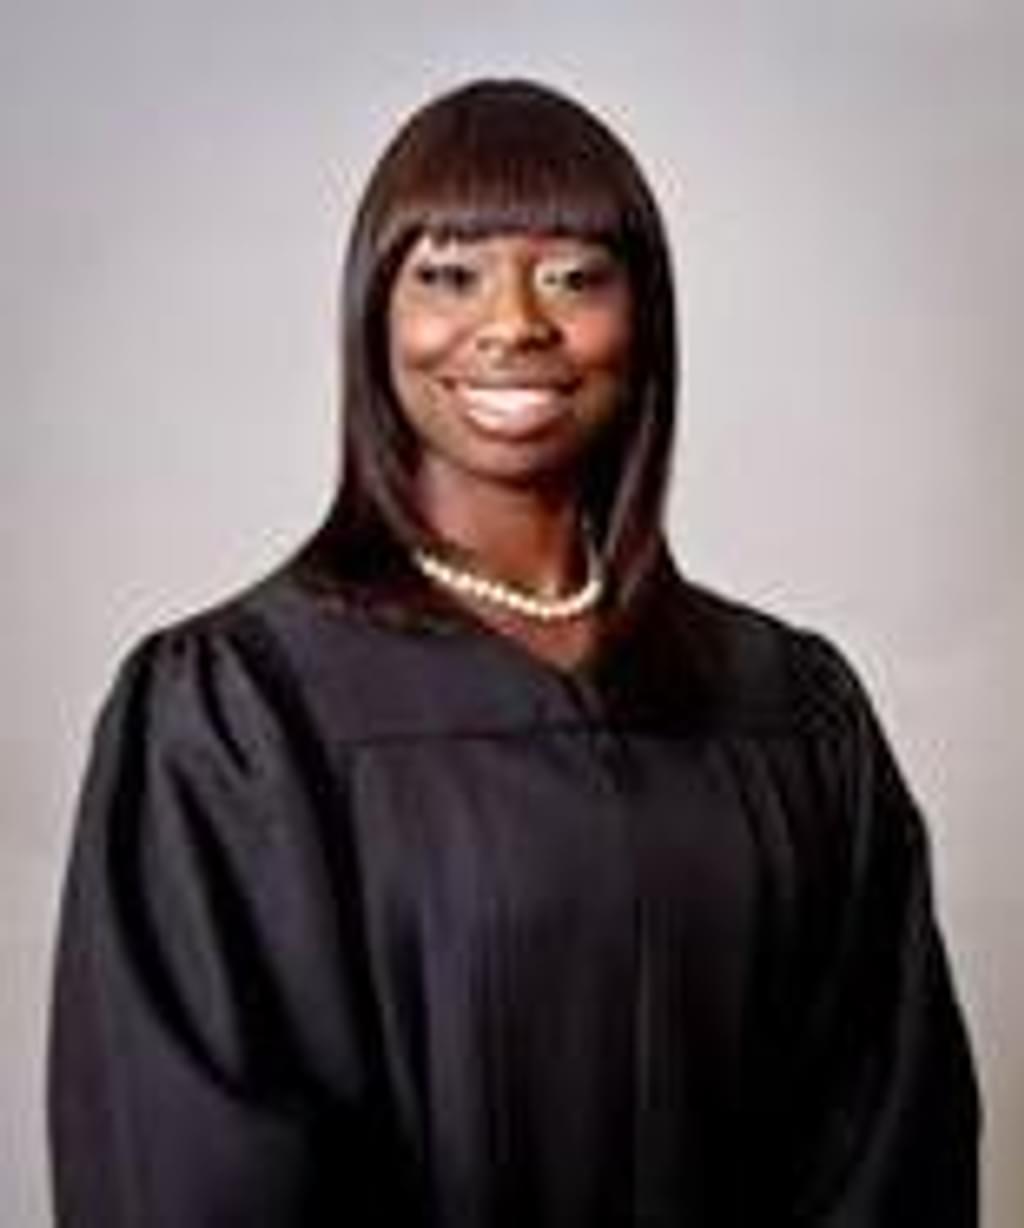 Alabama Judicial Disciplinary Court Suspends Judge Who Declared State’s Death Penalty Unconstitutional, Saying She Disregarded Appellate Decisions and Abandoned Neutrality